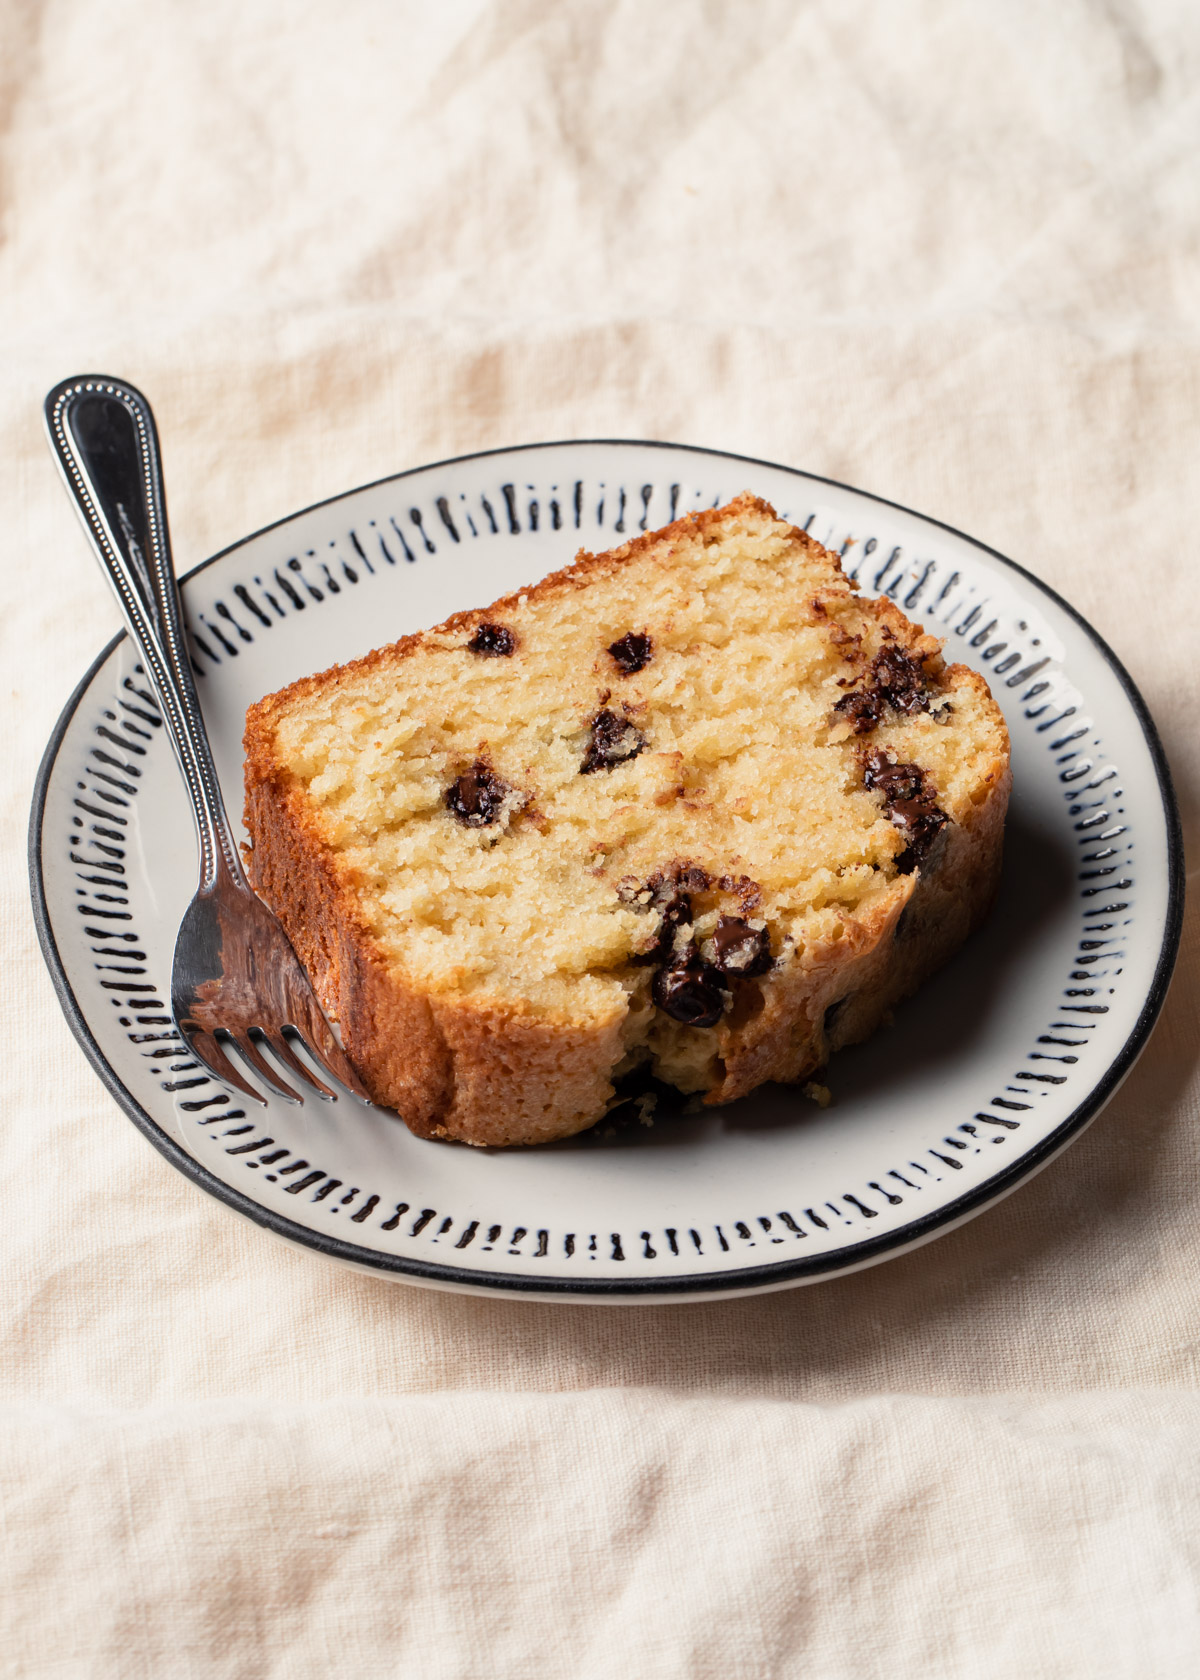 A slice of chocolate chip pound cake on a plate with a fork